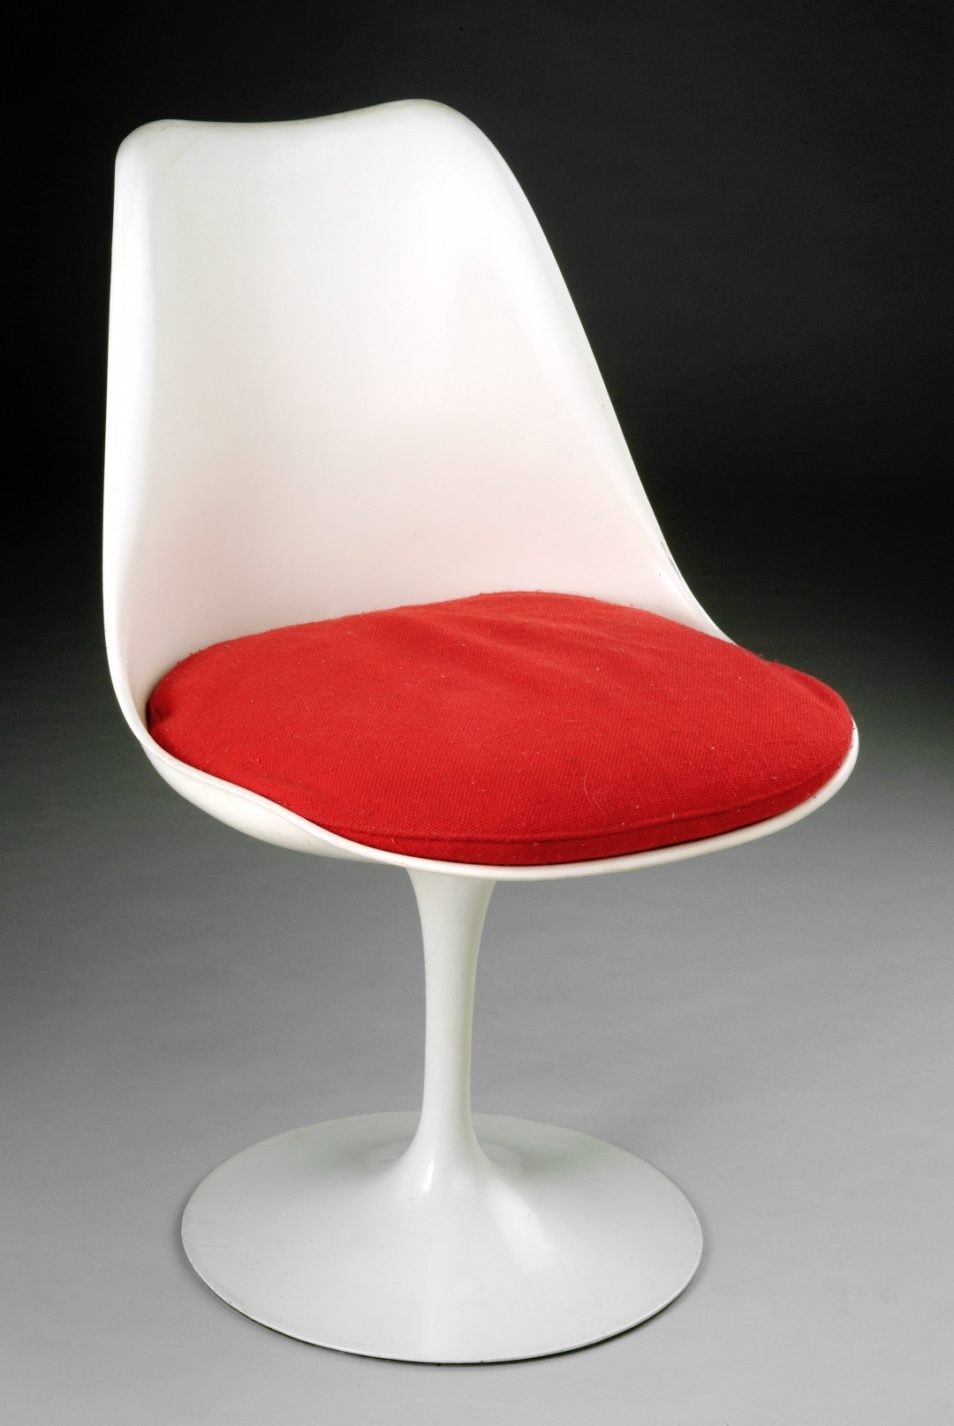 White plastic shell chair with a red cushion supported by a slender stem and a flared circular base.